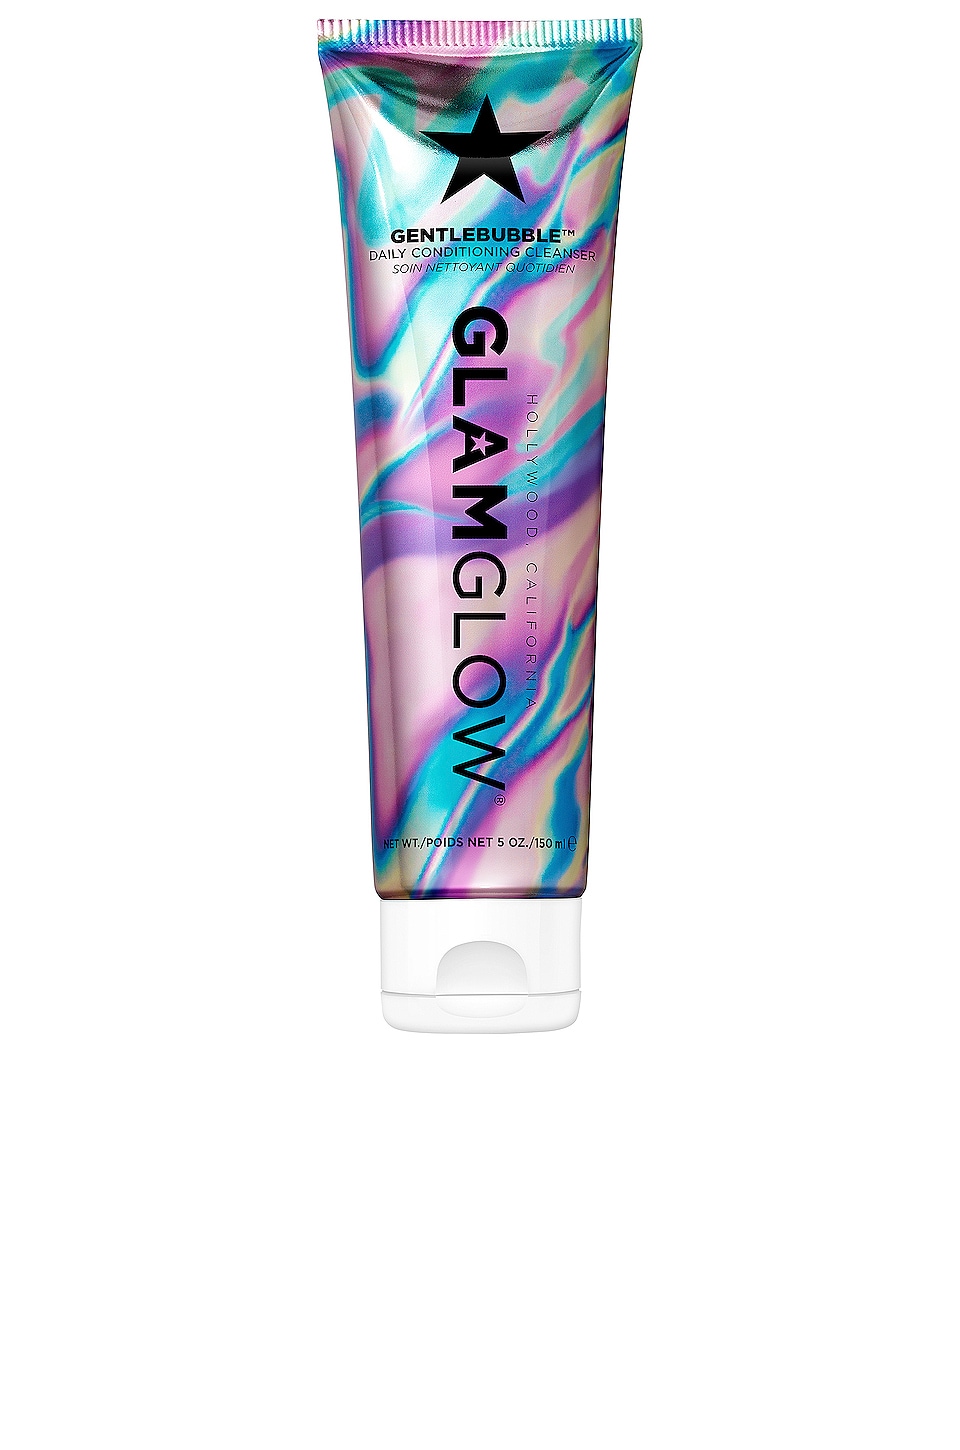 GLAMGLOW GENTLEBUBBLE DAILY CONDITIONING CLEANSER,GMGW-WU37